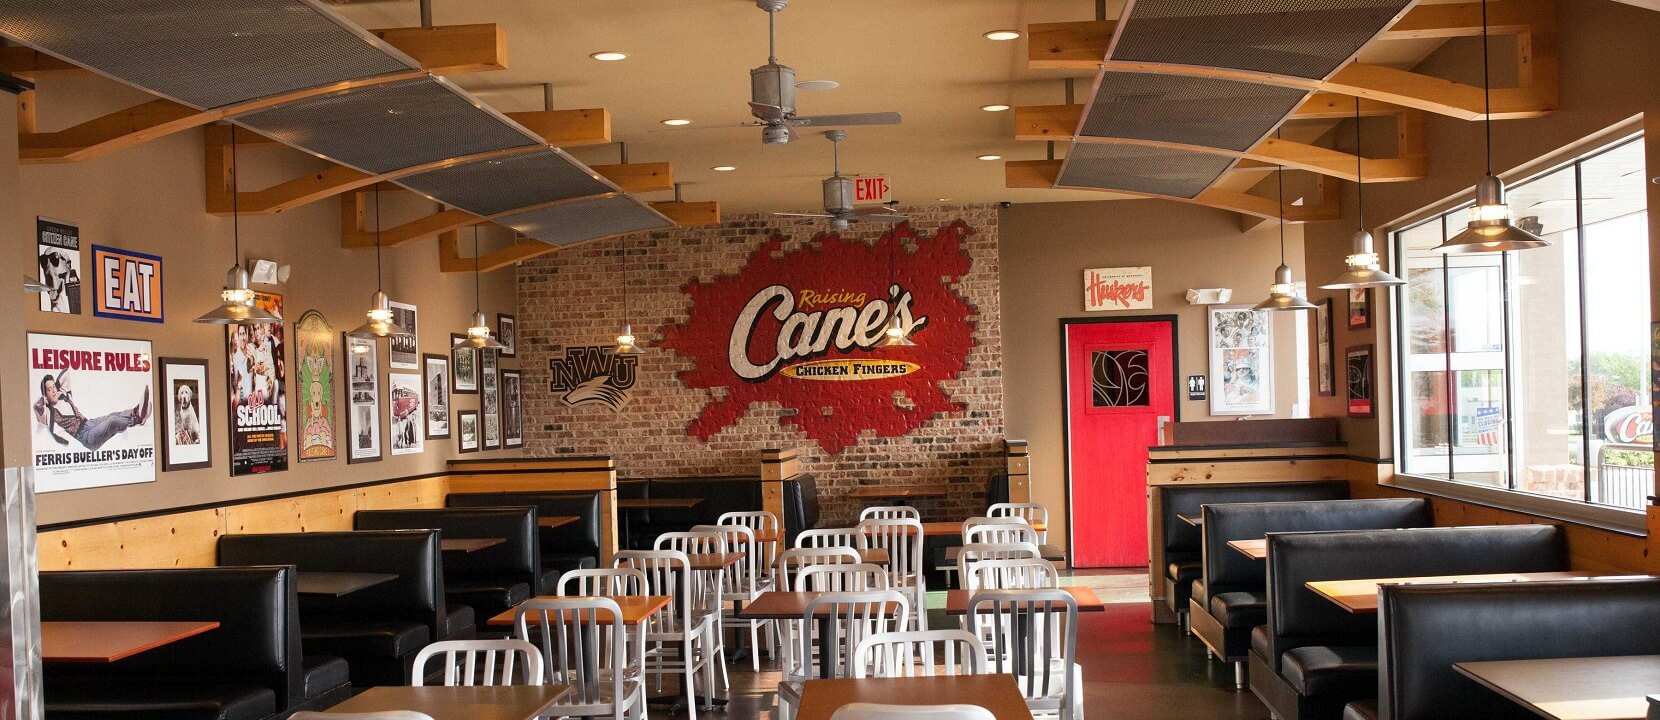 Nationwide Fixture Installations Inc Raising Cane's Chicken Fingers Case Study Millwork Packages New Store Installation Signage